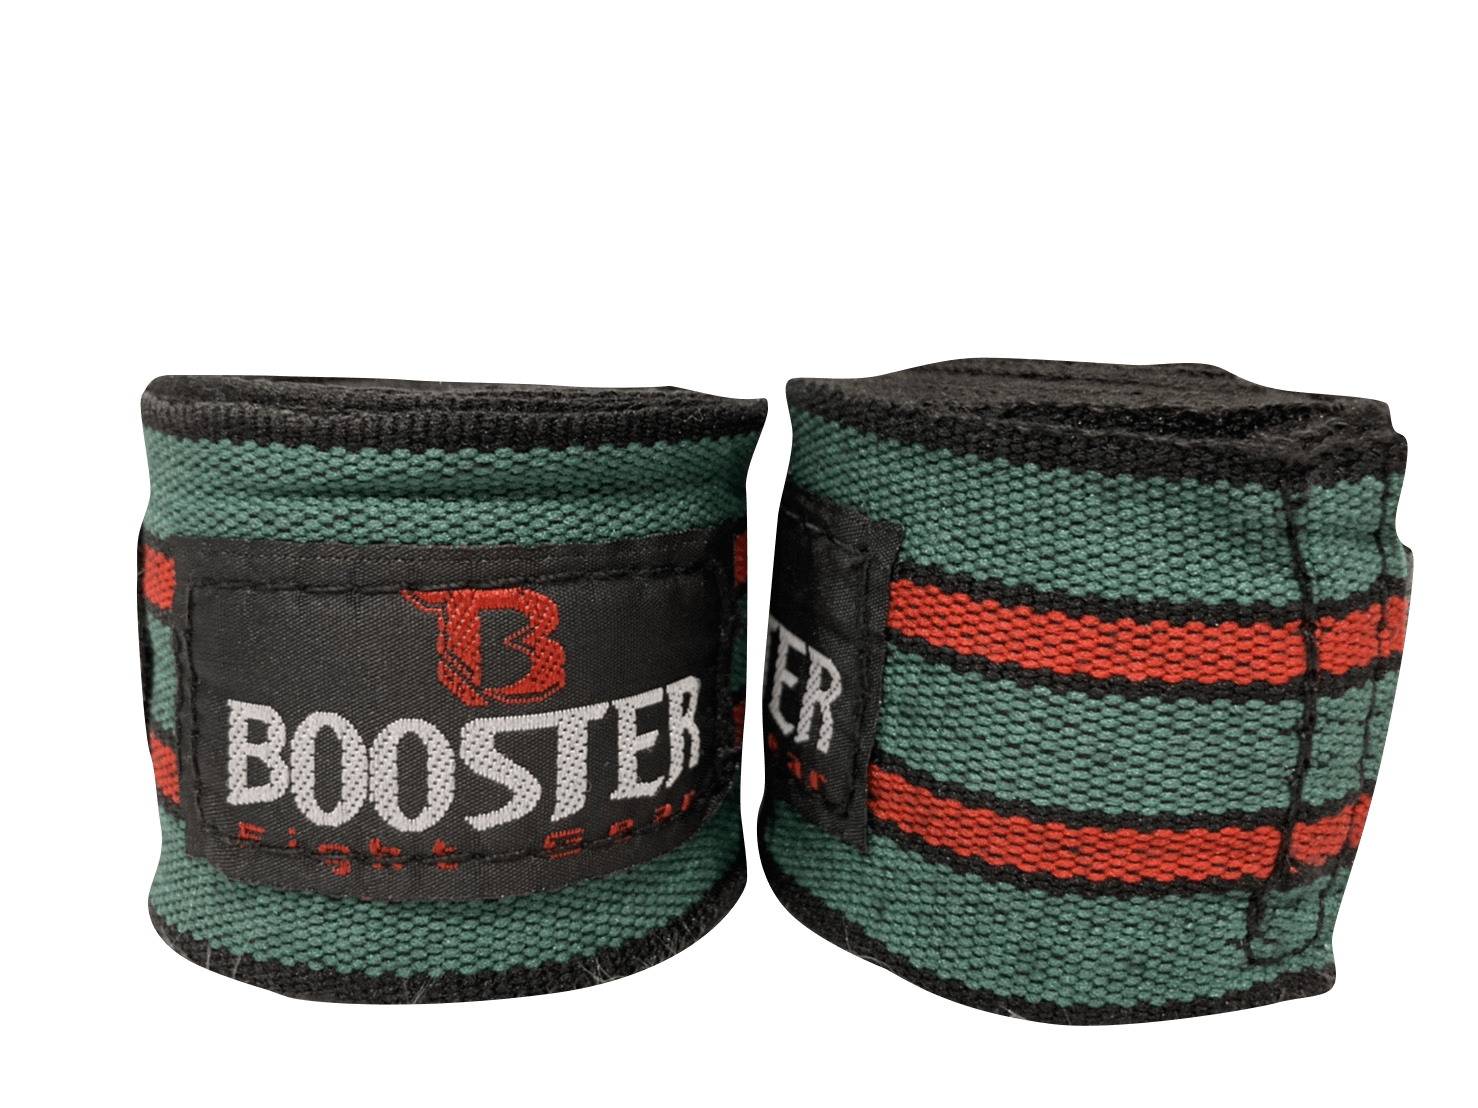 Booster Handwraps BPC Army Green Red 4.6M